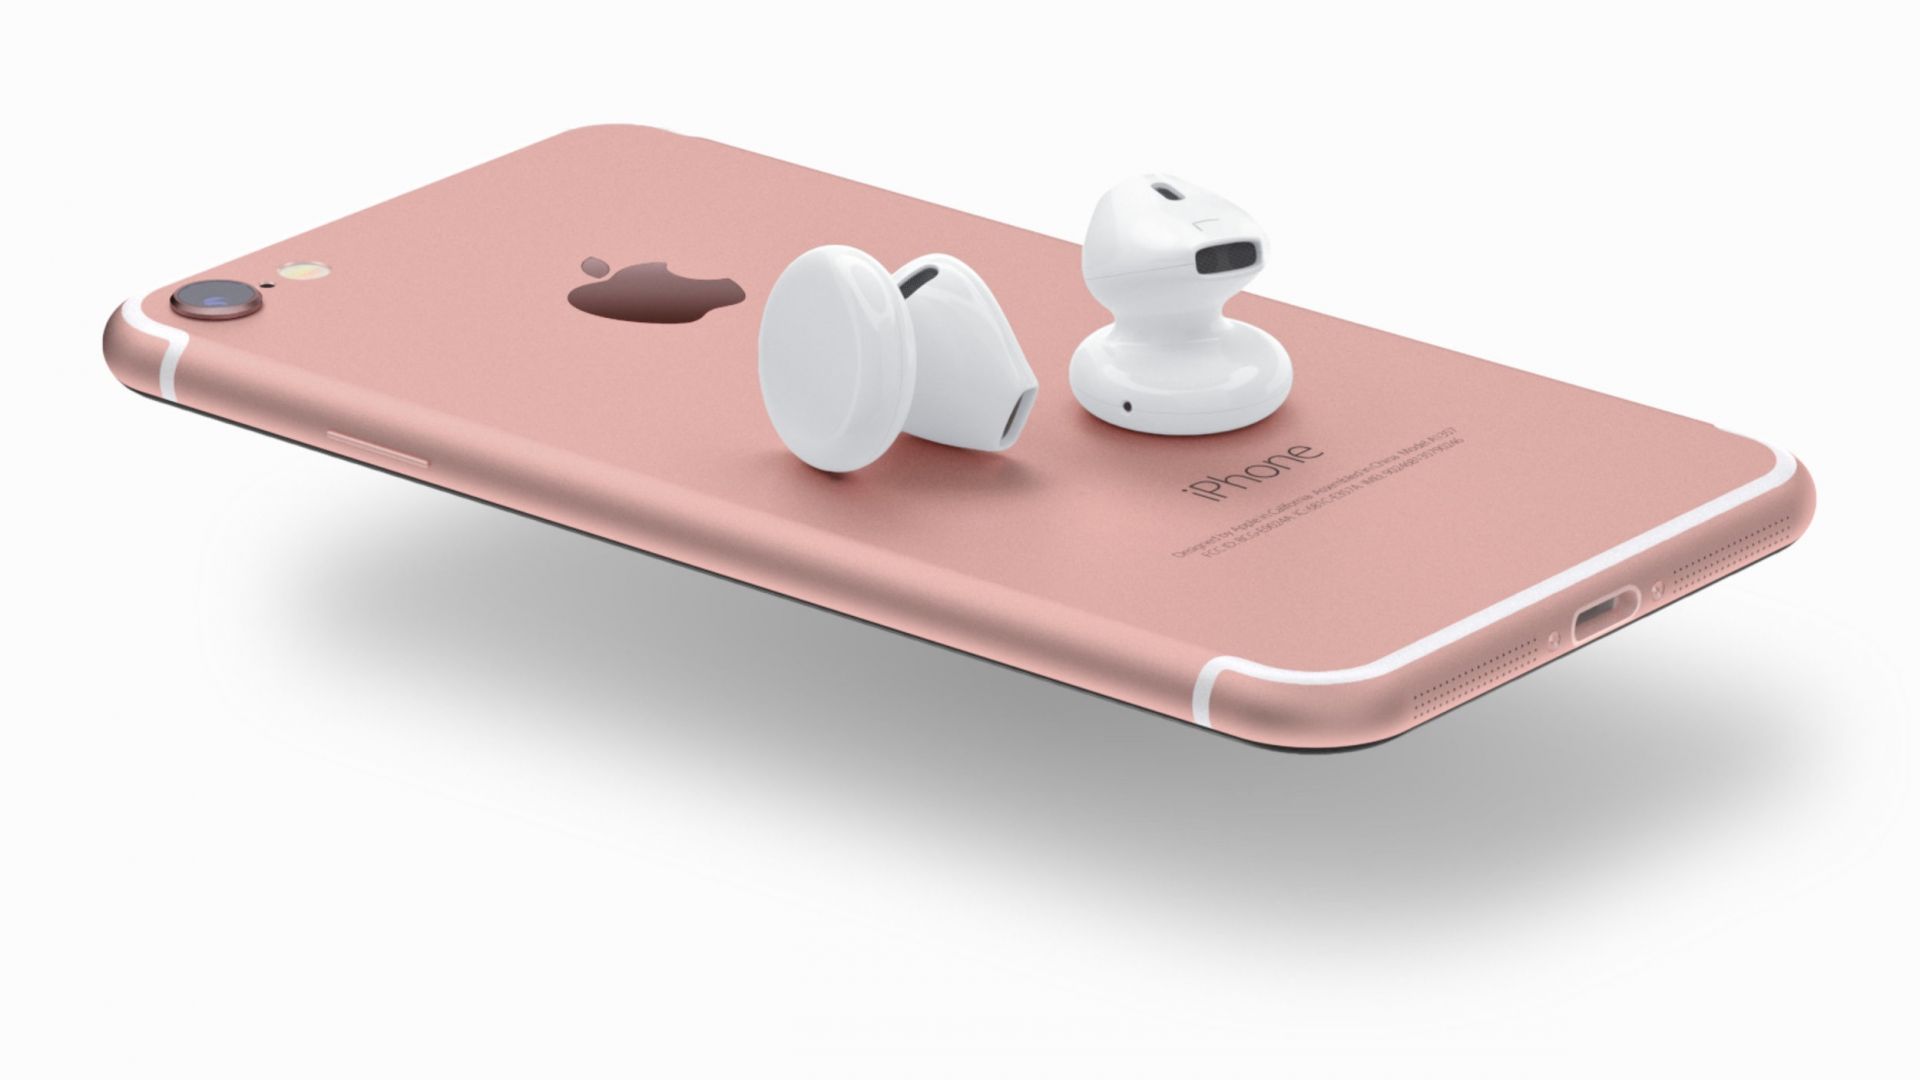 Airpods, Iphone 7, Review, Headset, Wireless, Best - Iphone 7 Rose Gold Waterproof - HD Wallpaper 